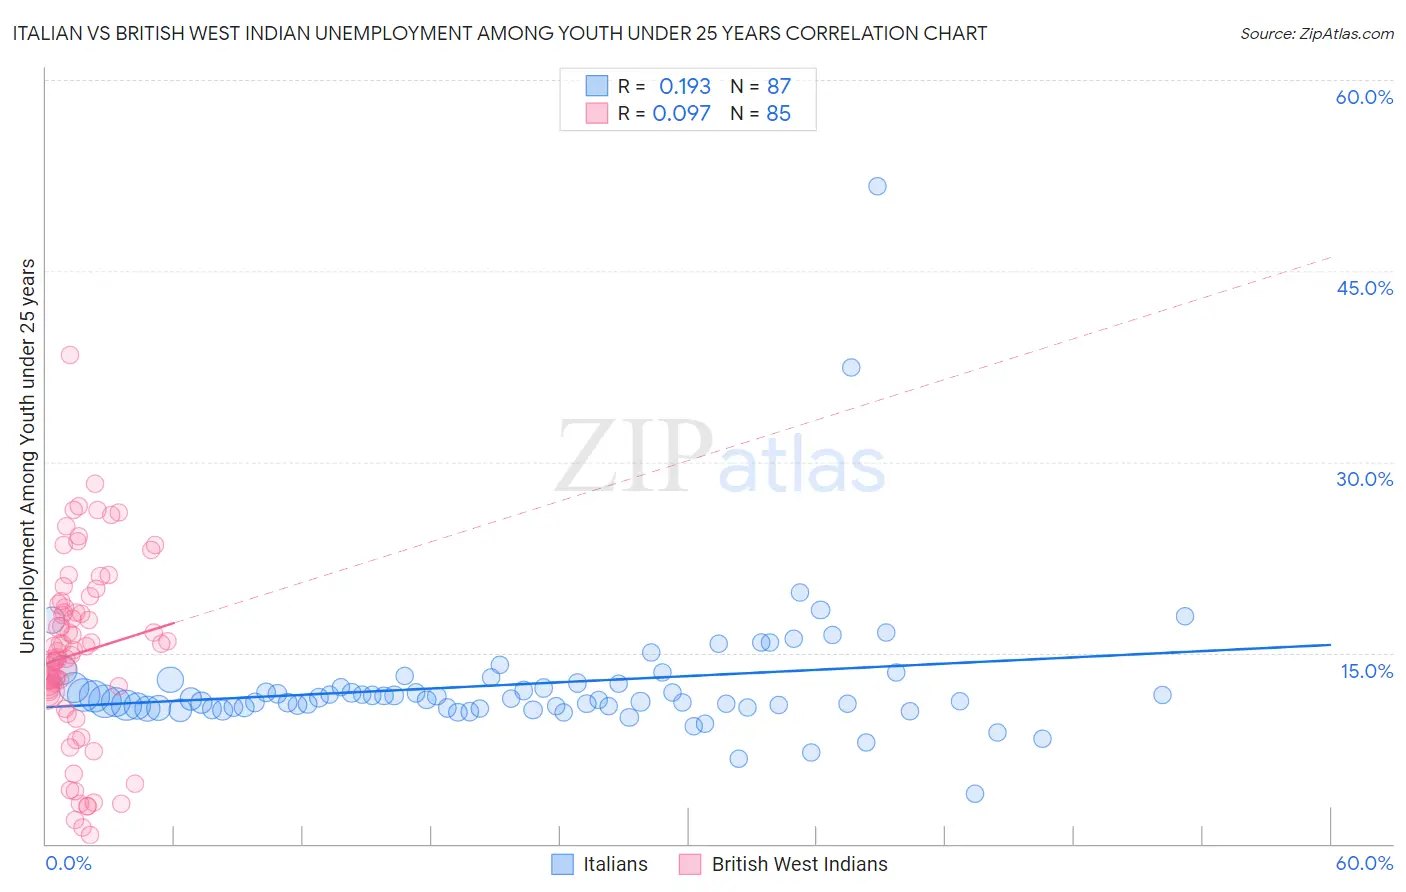 Italian vs British West Indian Unemployment Among Youth under 25 years